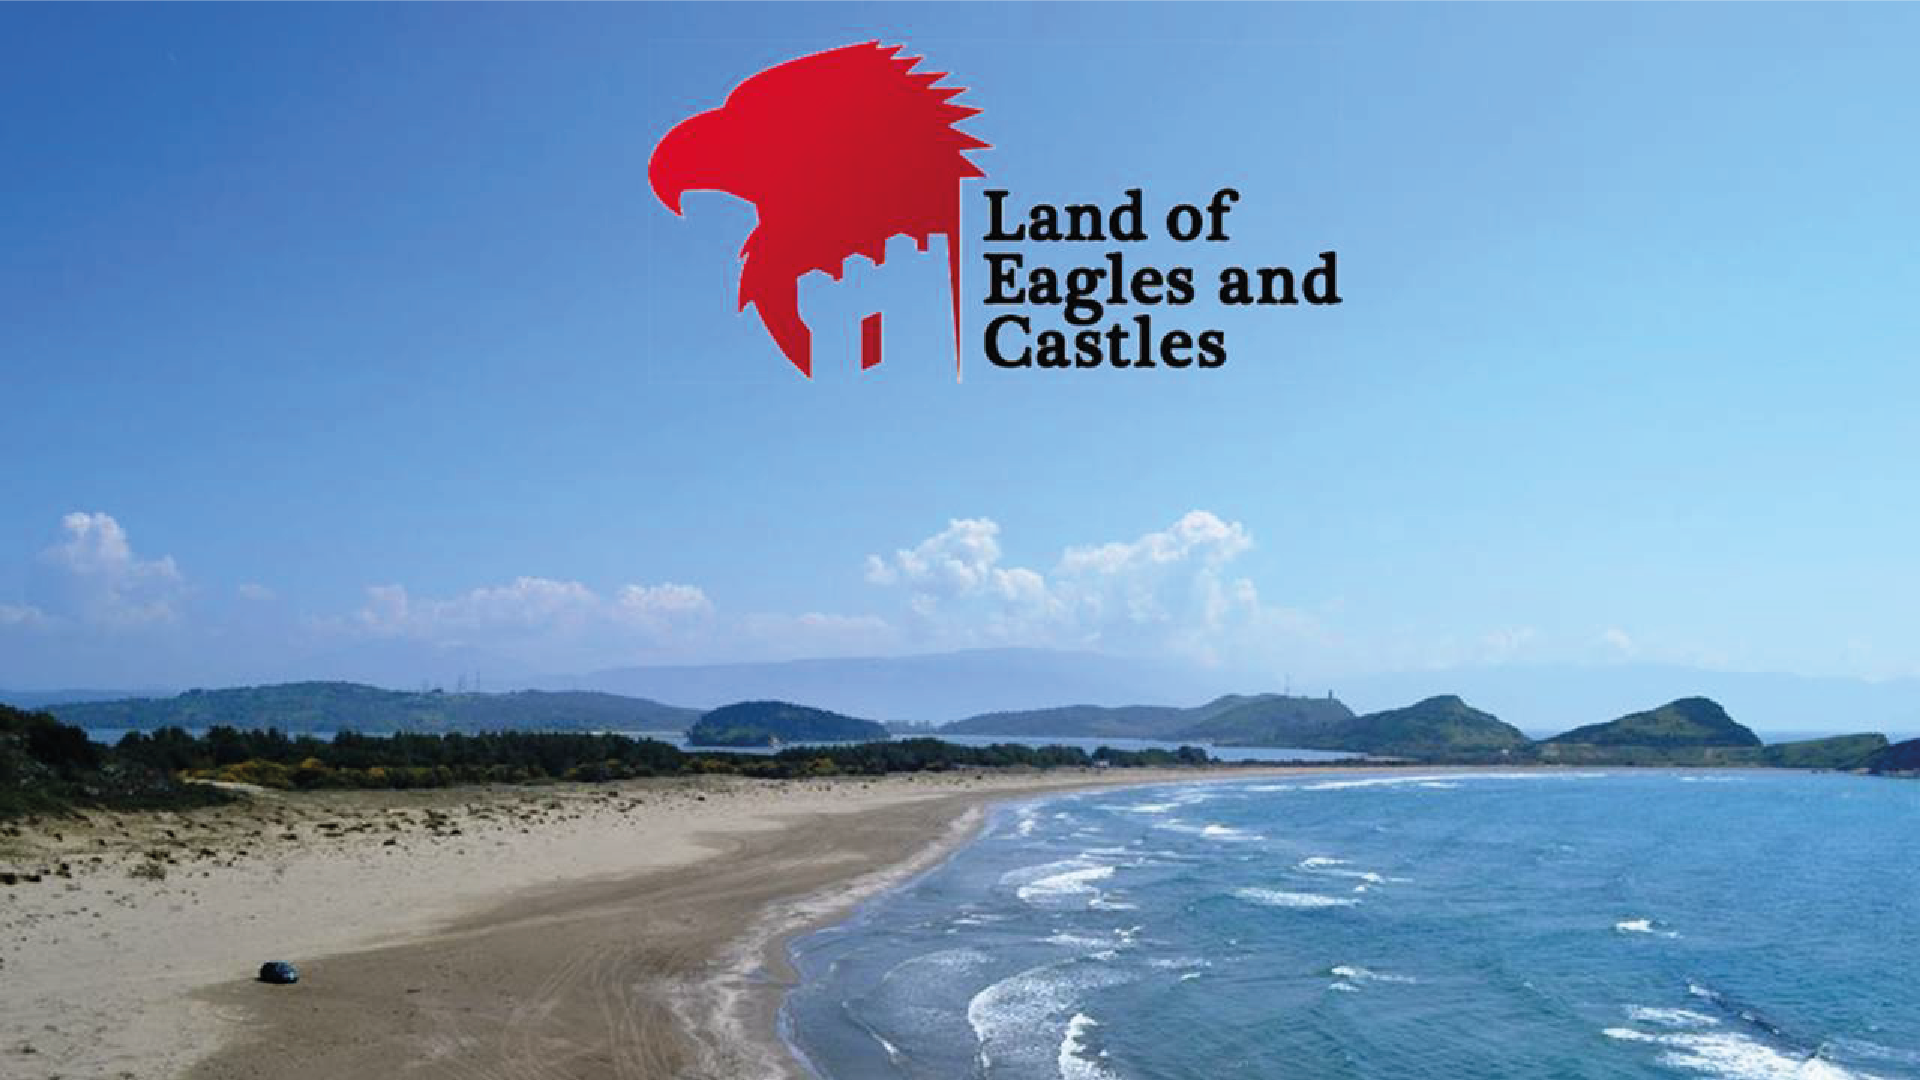 Land of Eagles and Castles